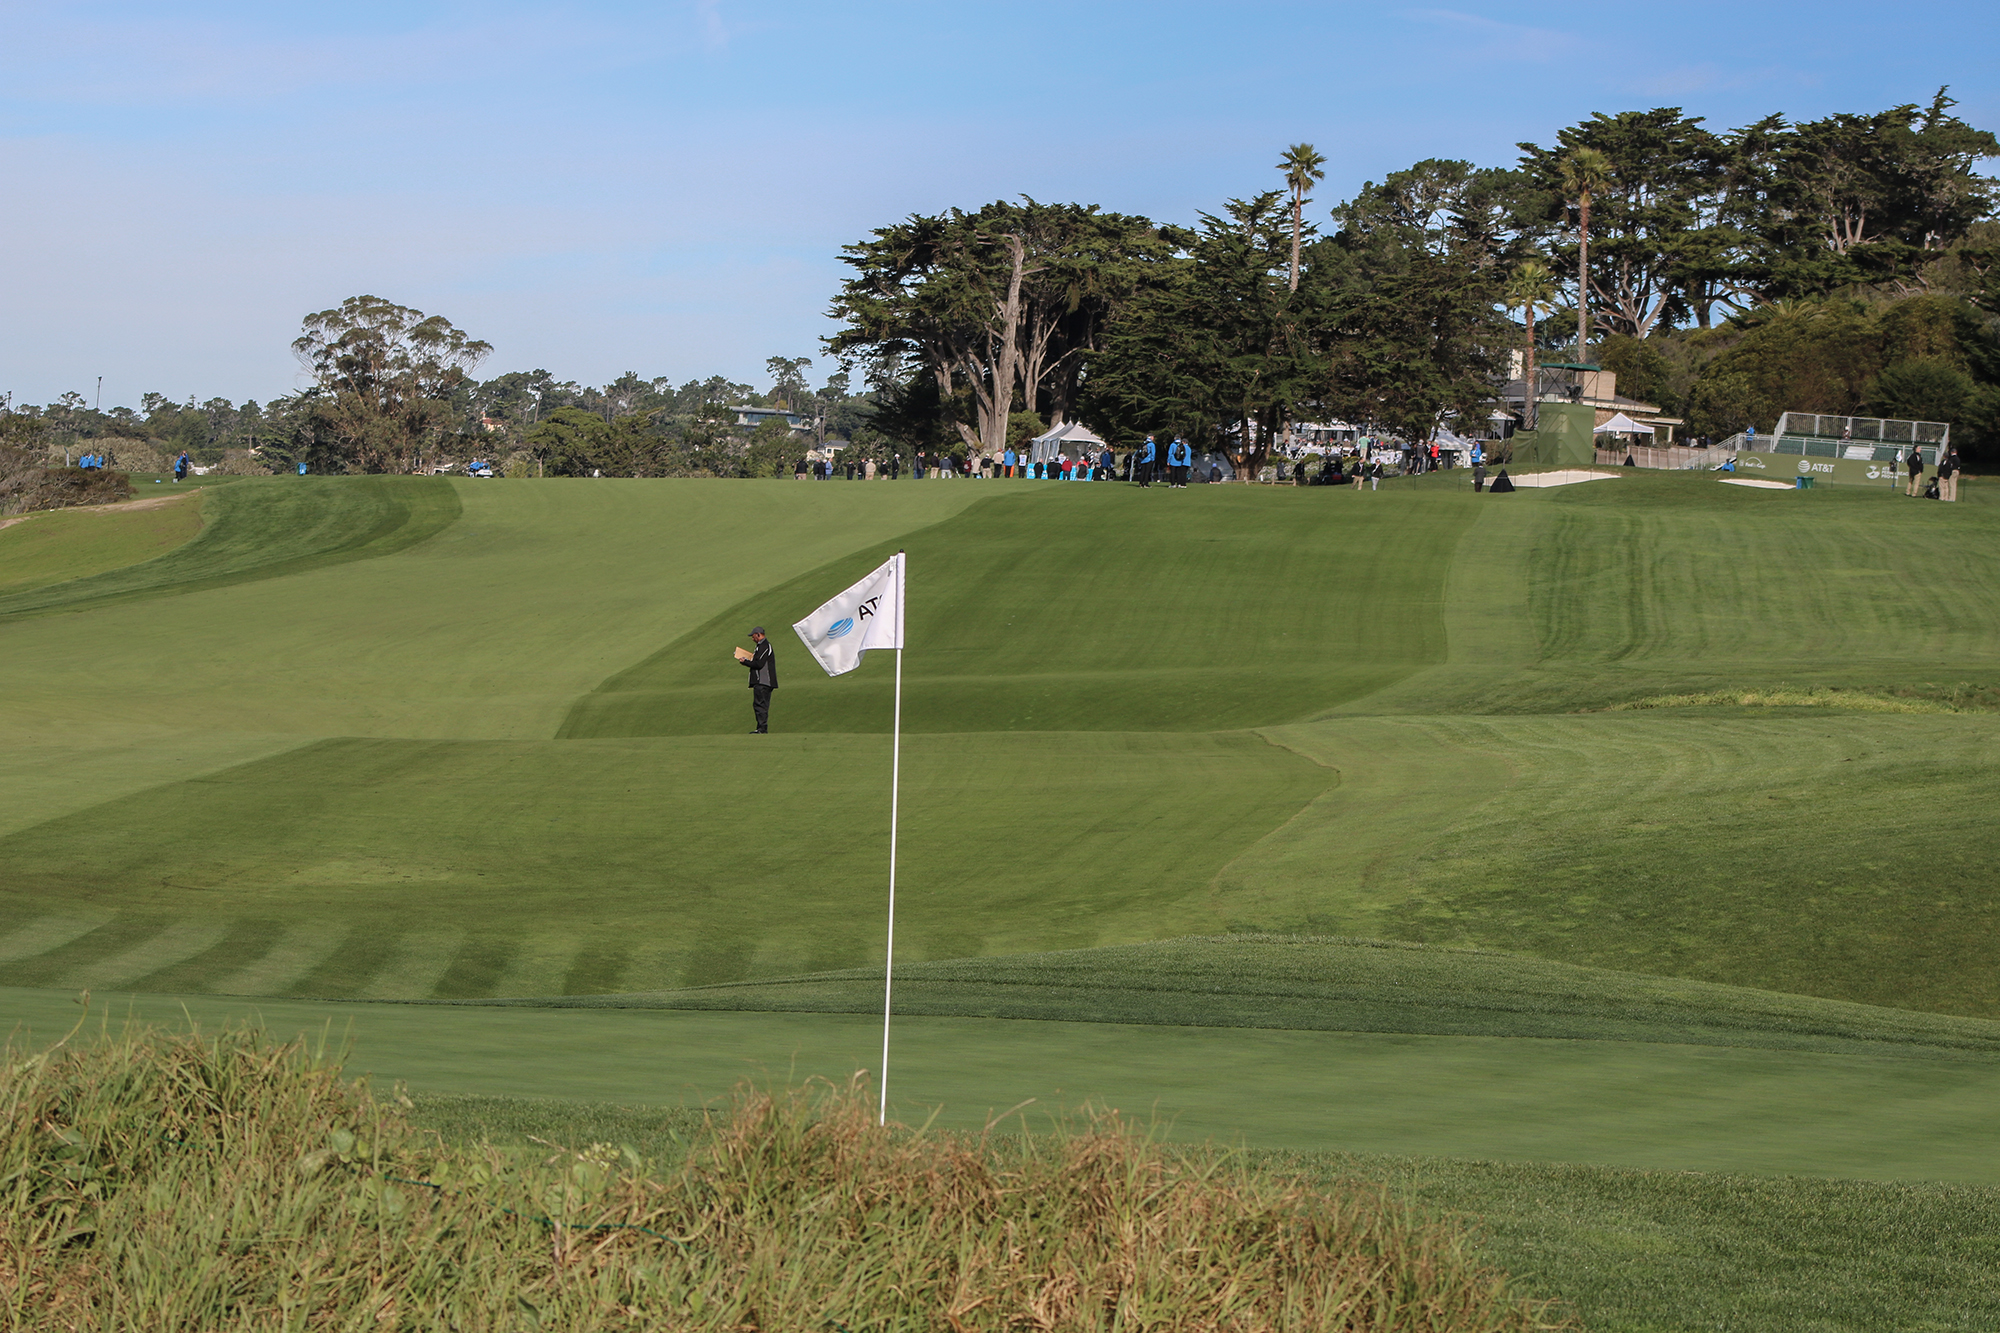 9th hole at Pebble Beach with rough lines